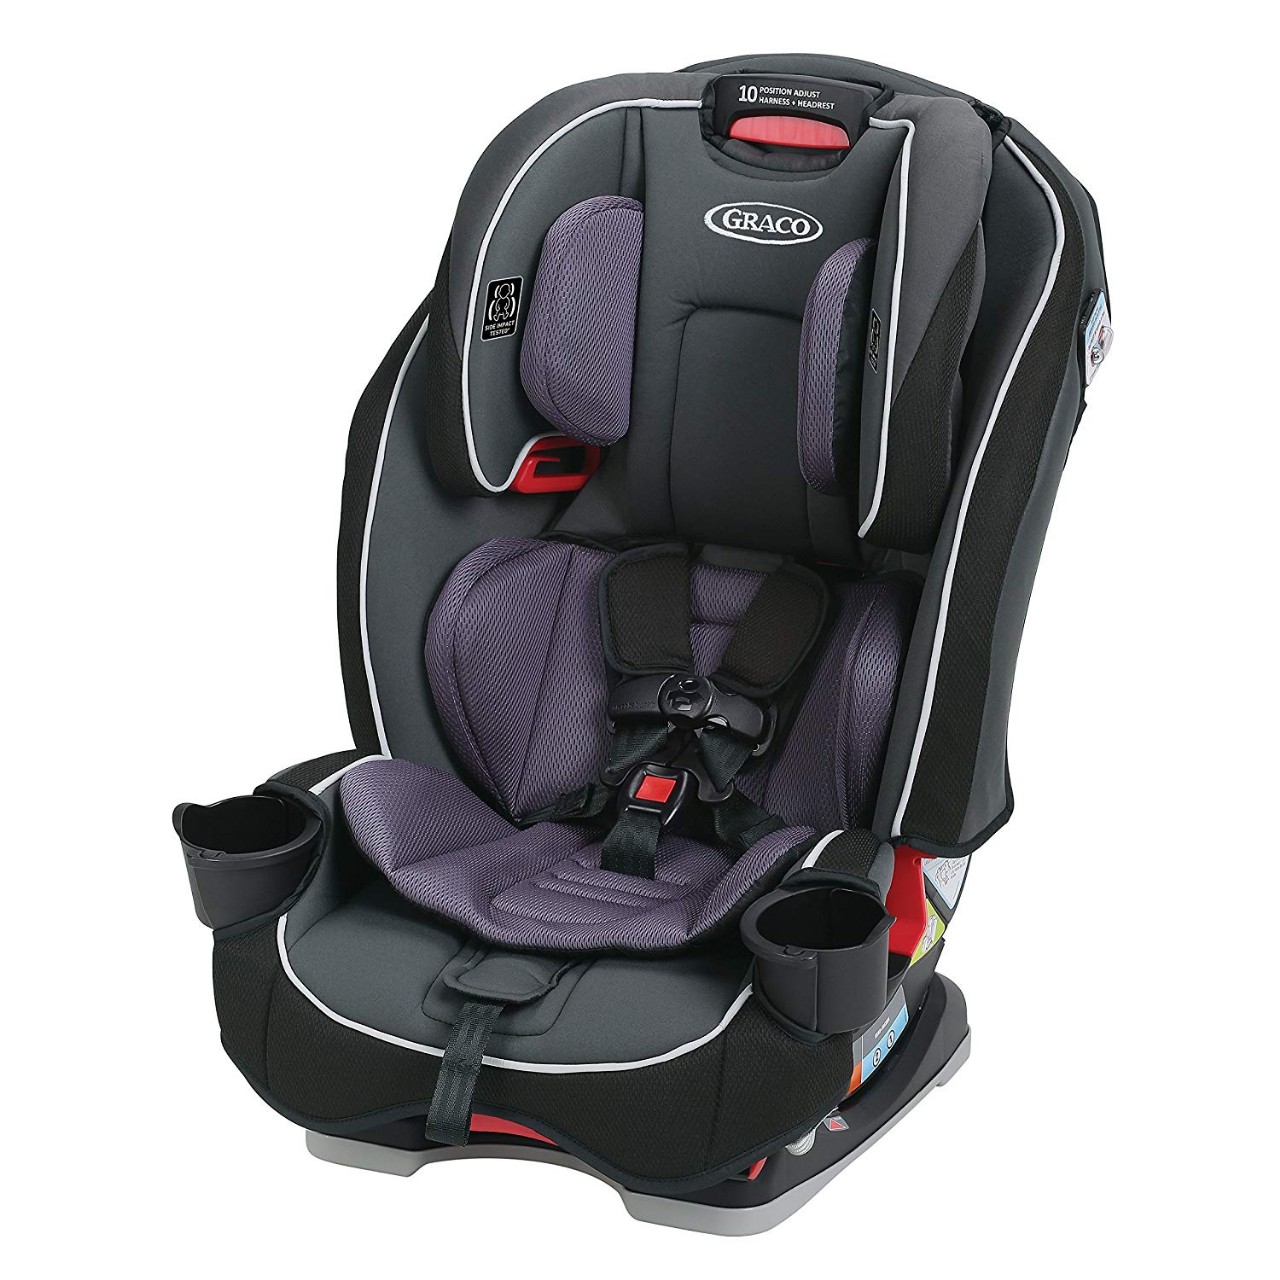 Graco SlimFit 3 in 1 Convertible Car Seat | Infant to Toddler Car Seat, Saves Space in your Back